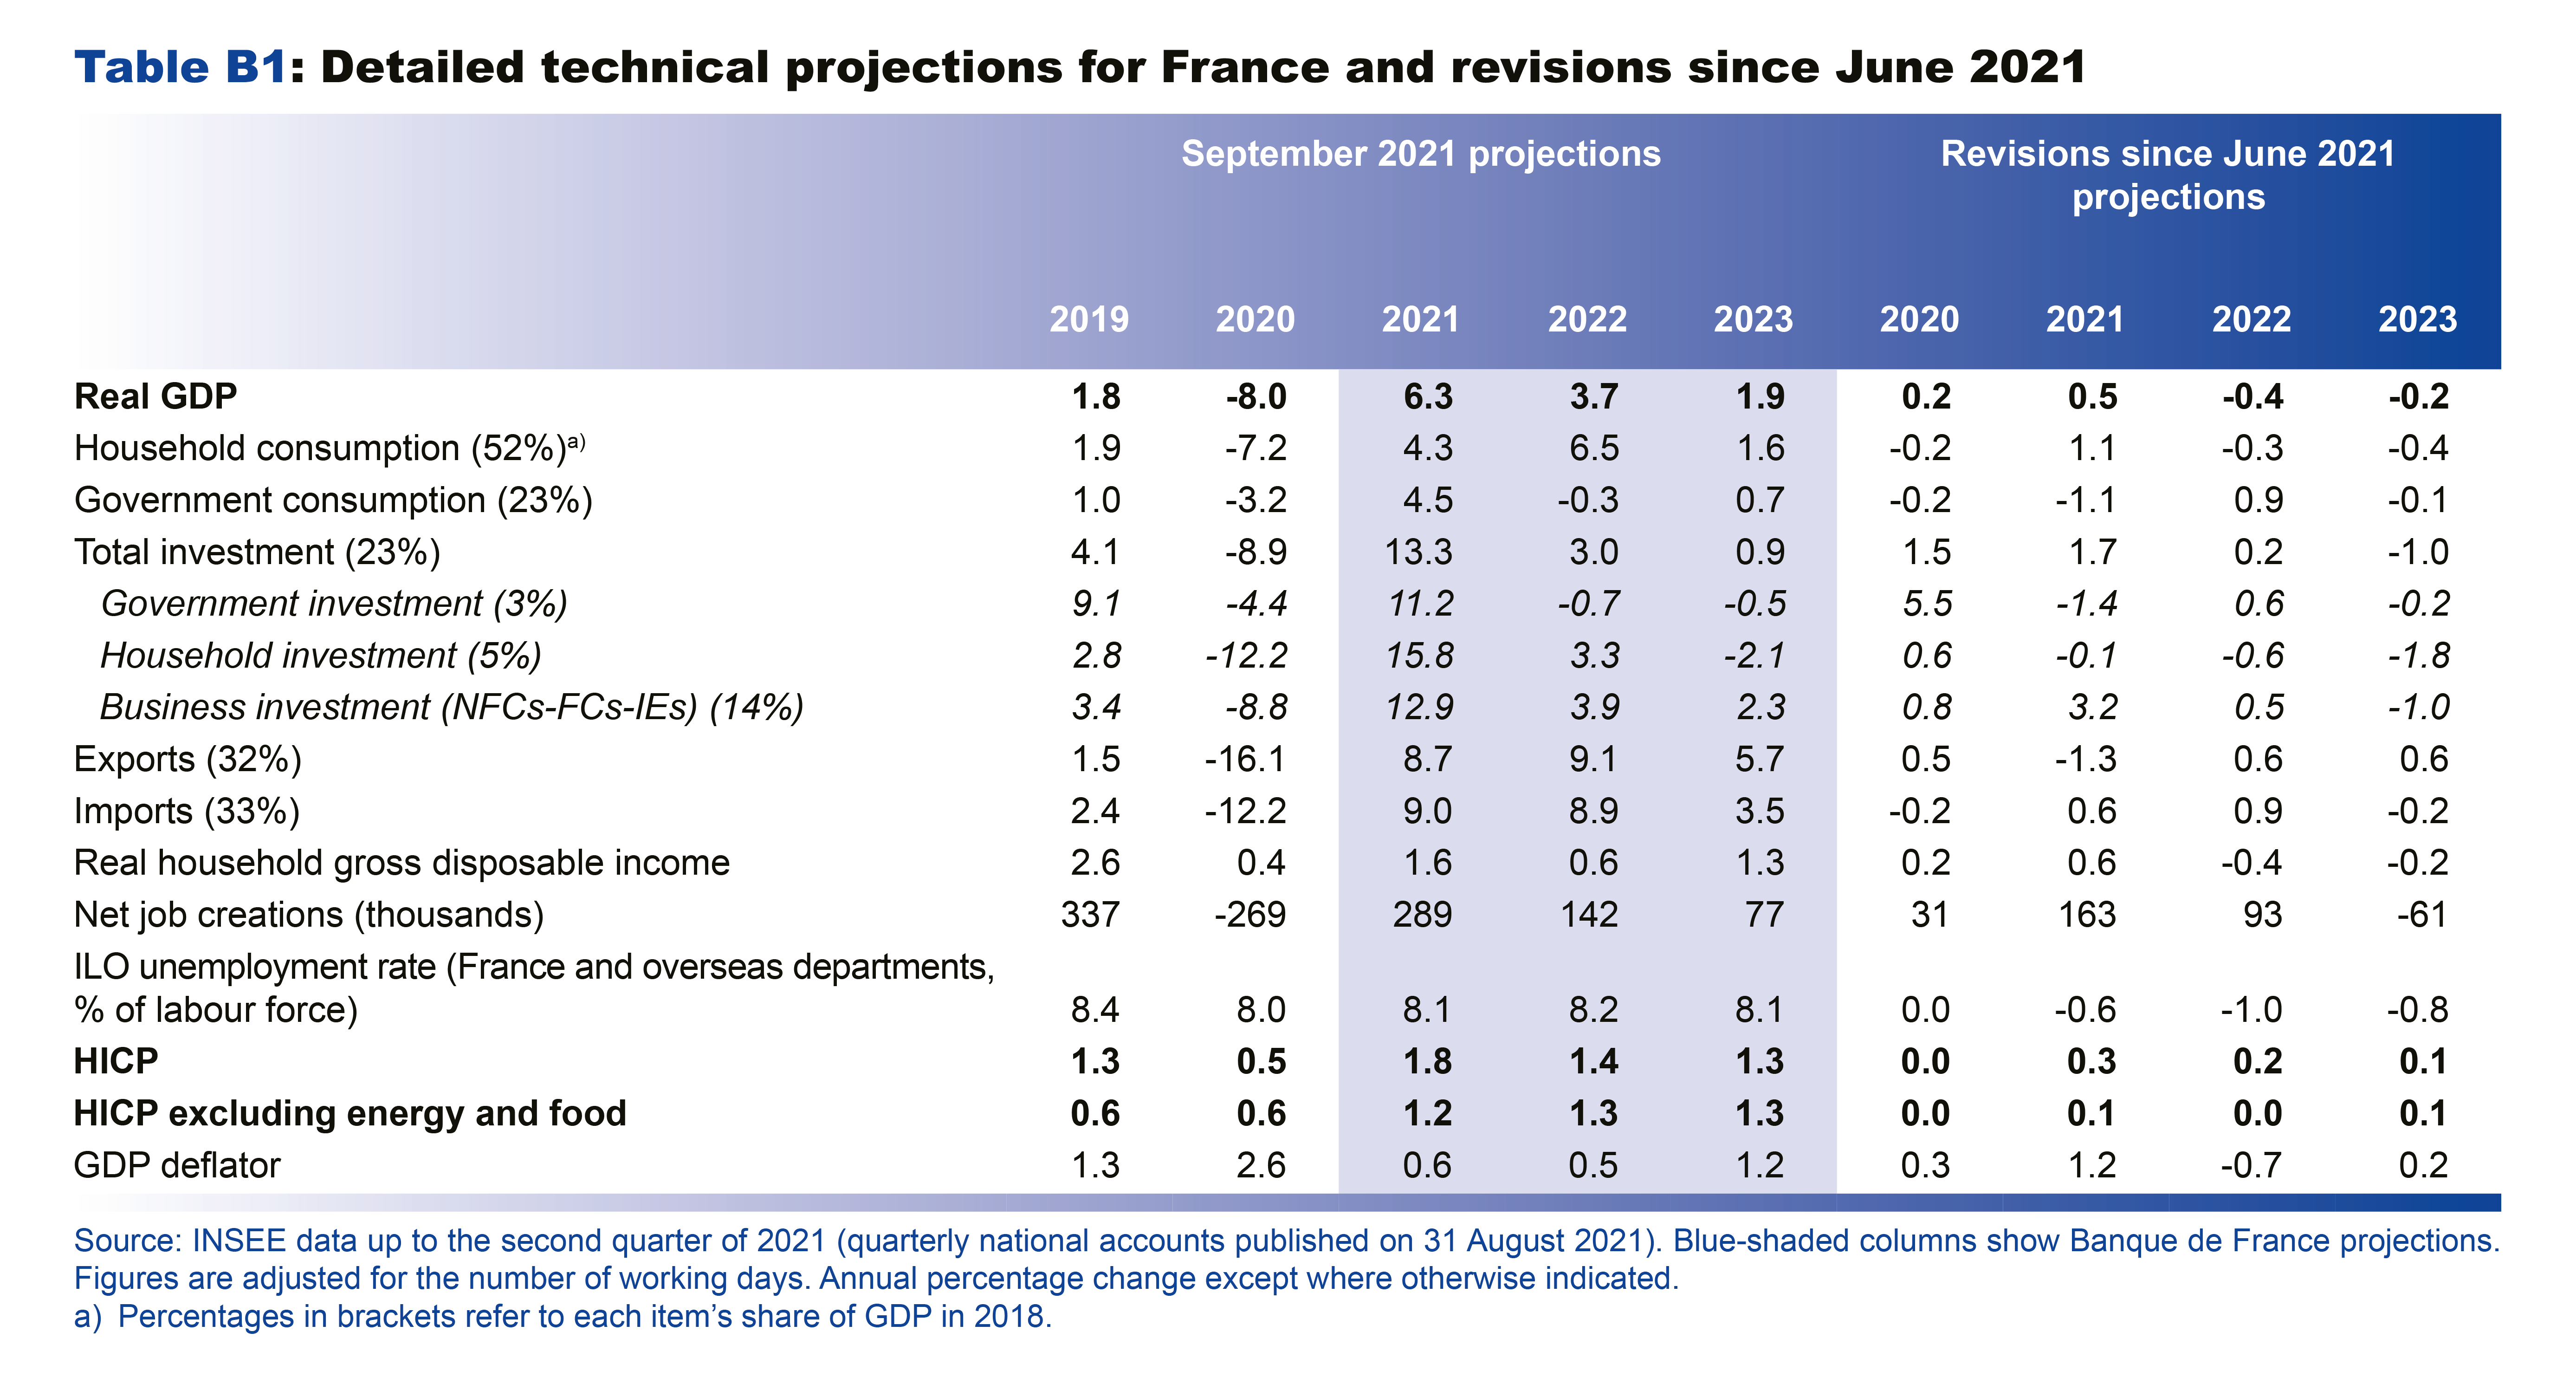 Macroeconomic projections – September 2021 - Detailed technical projections for France and revisions since June 2021